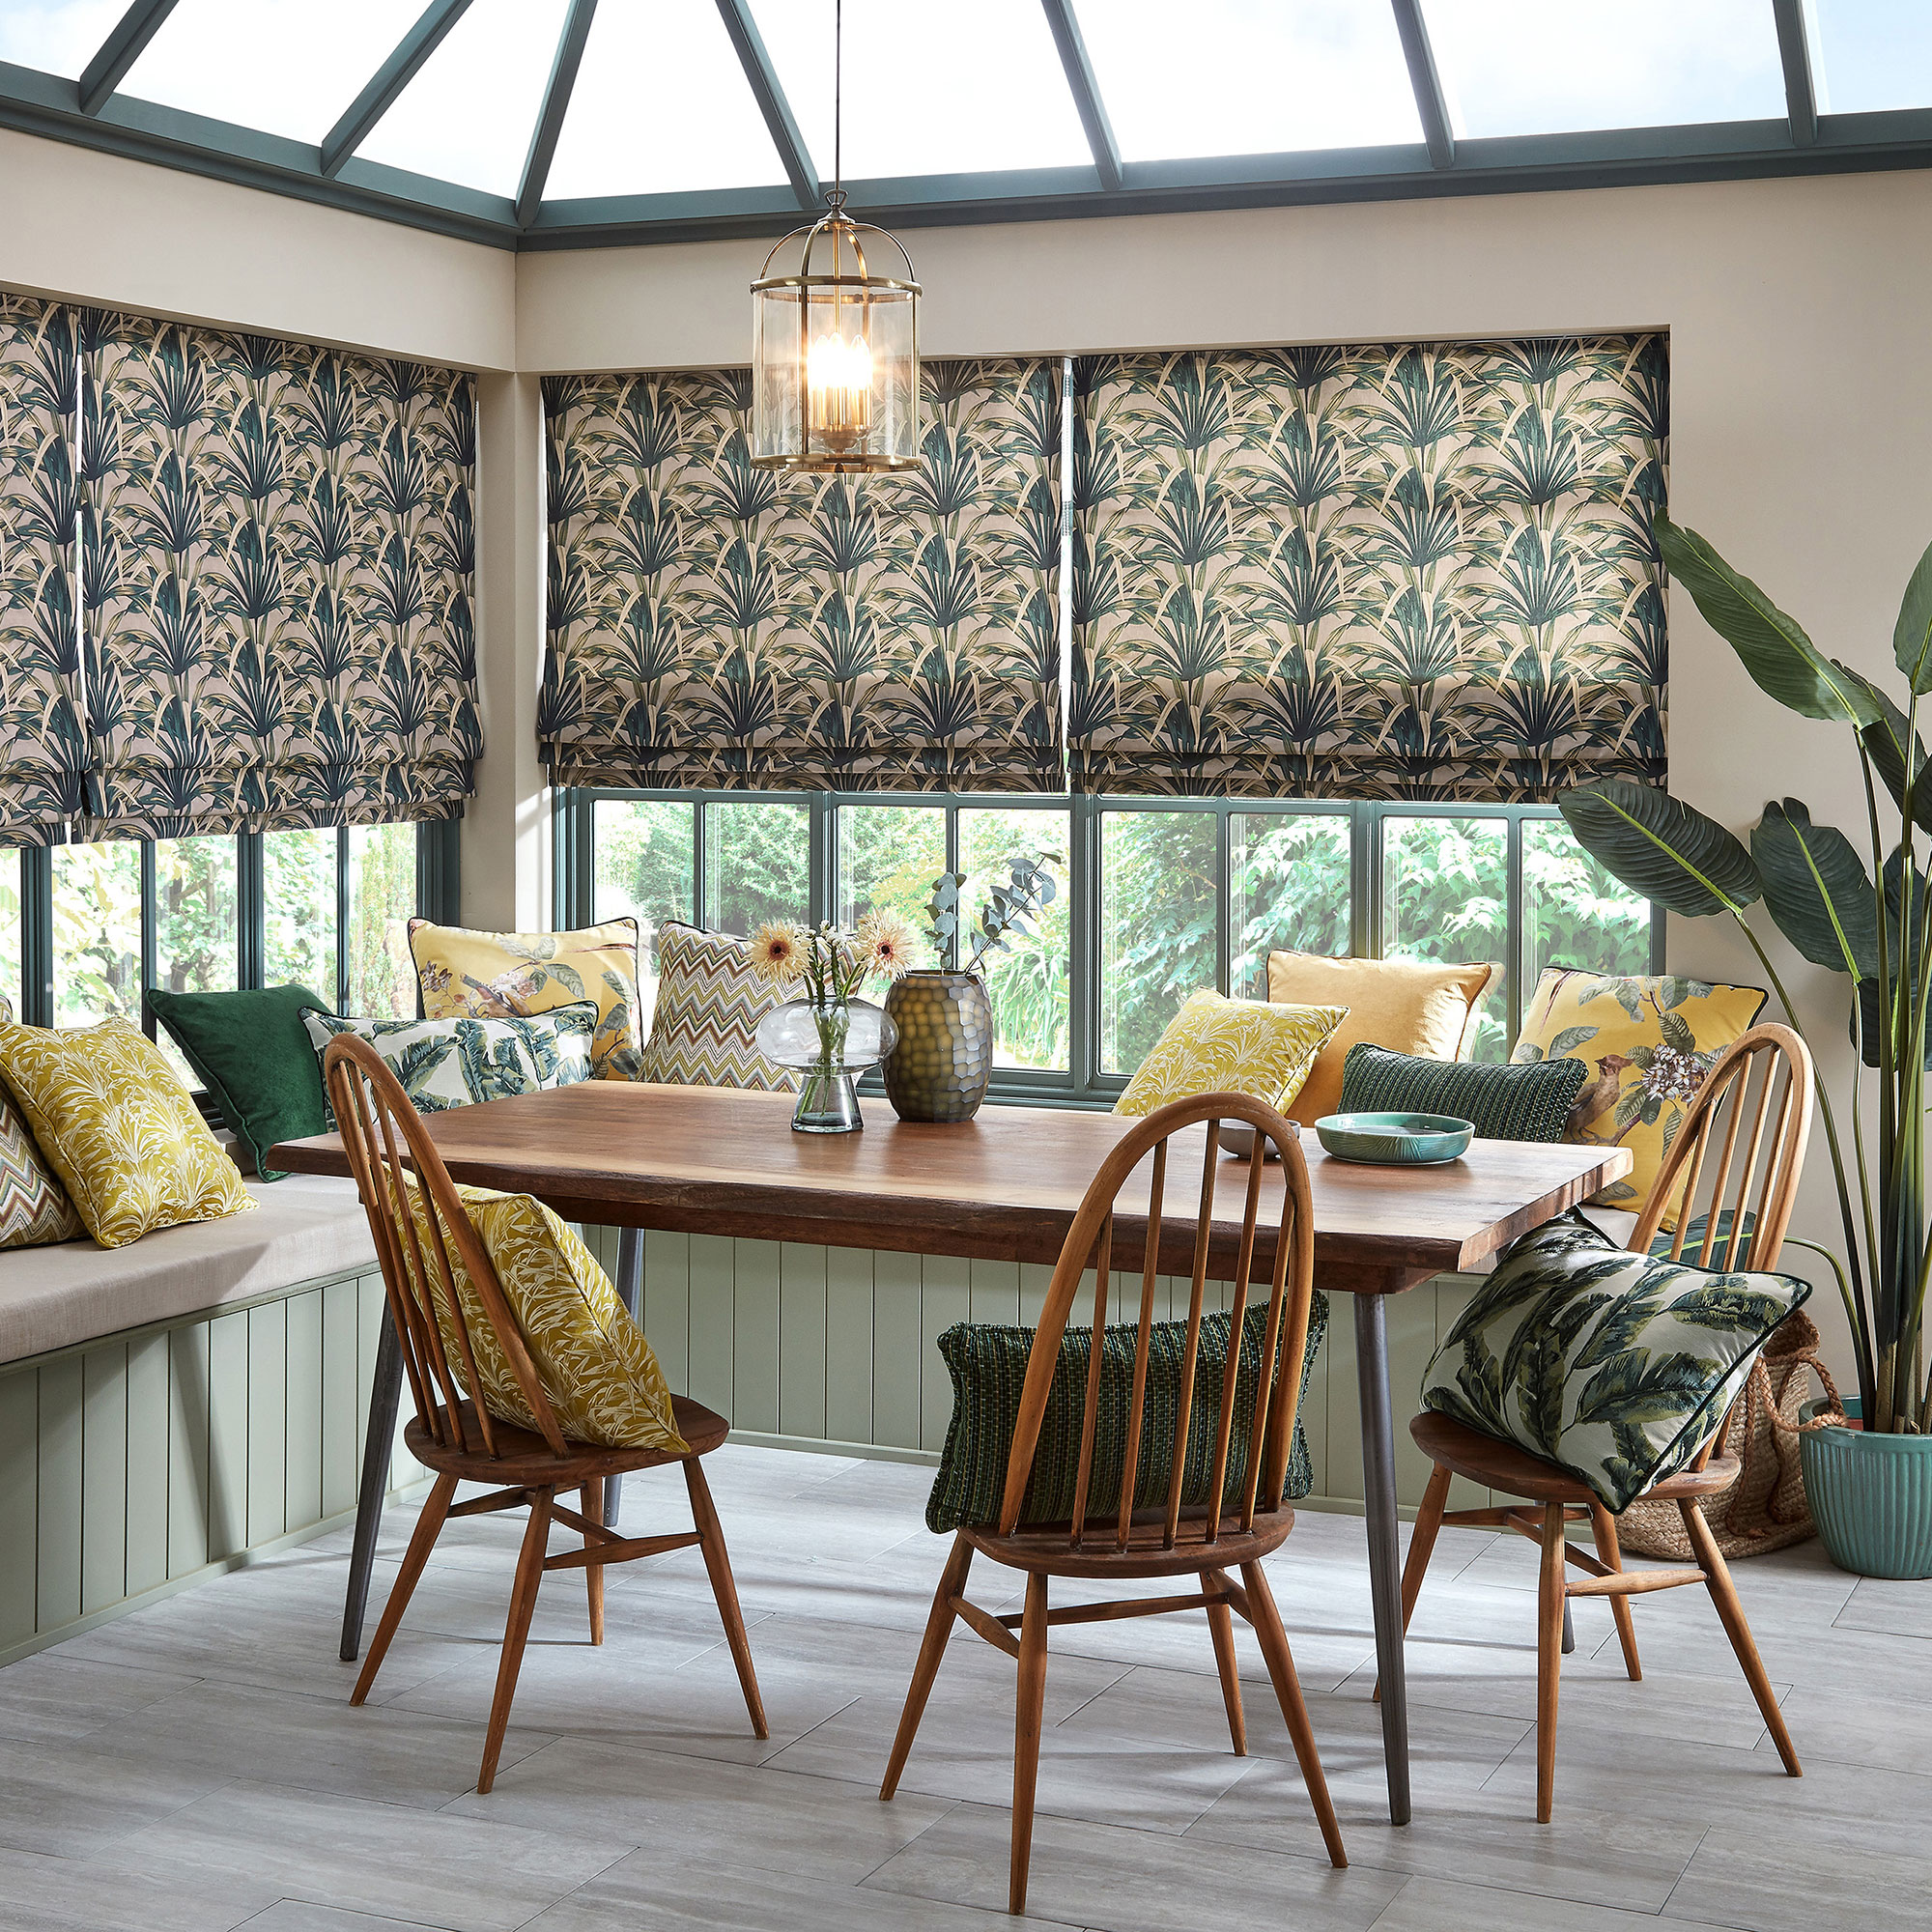 Conservatory space with patterned blinds and banquette seating